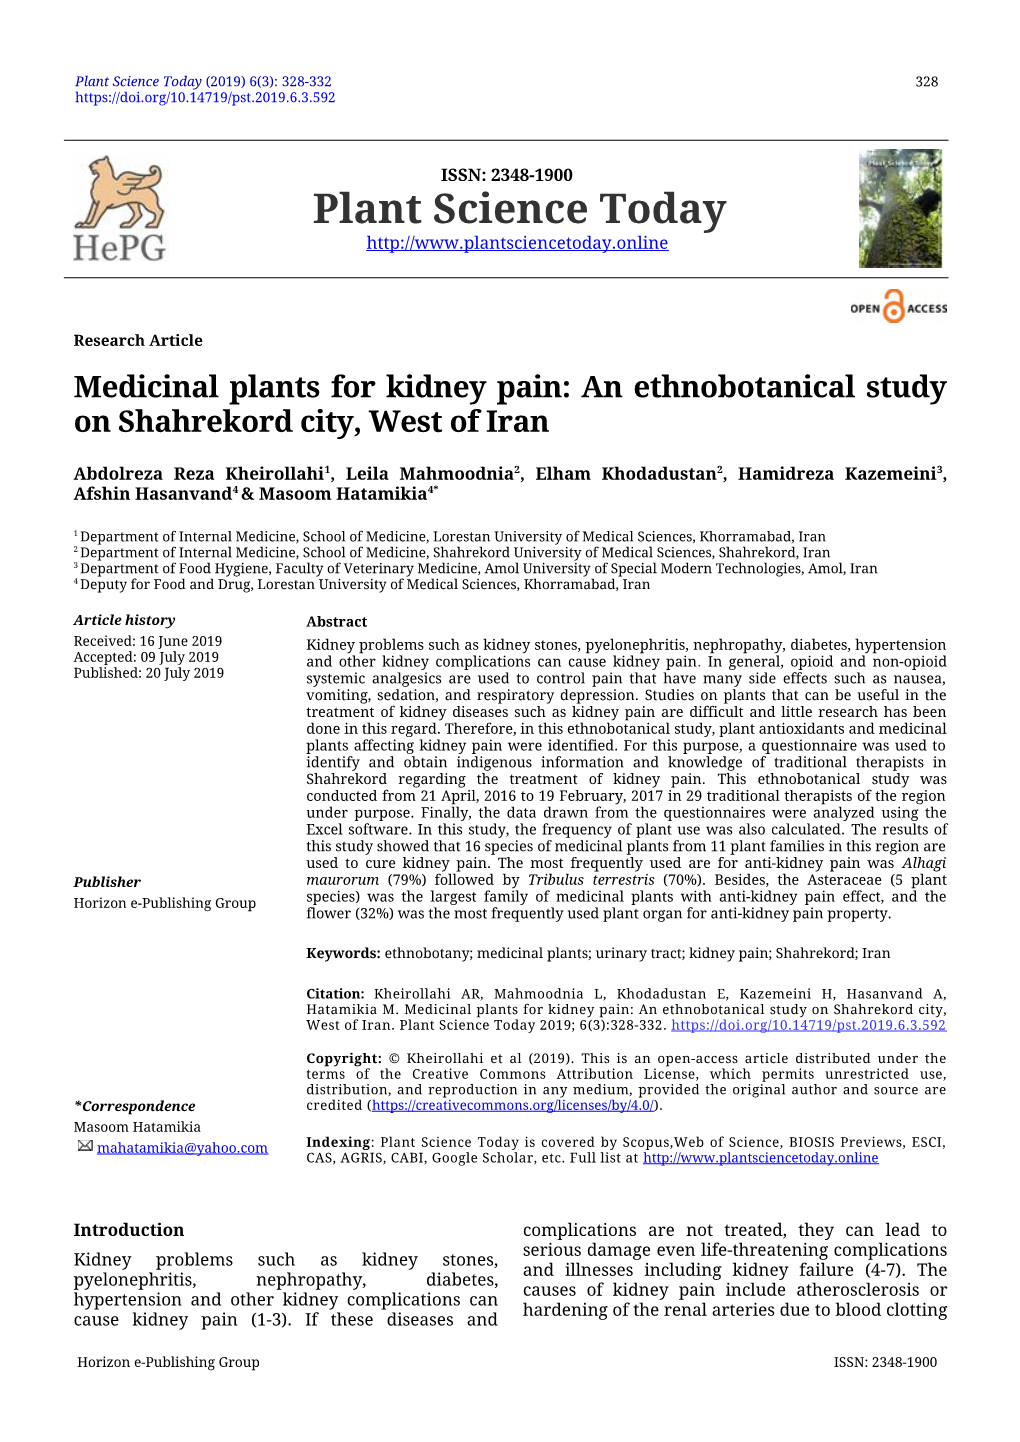 Medicinal Plants for Kidney Pain: an Ethnobotanical Study on Shahrekord City, West of Iran